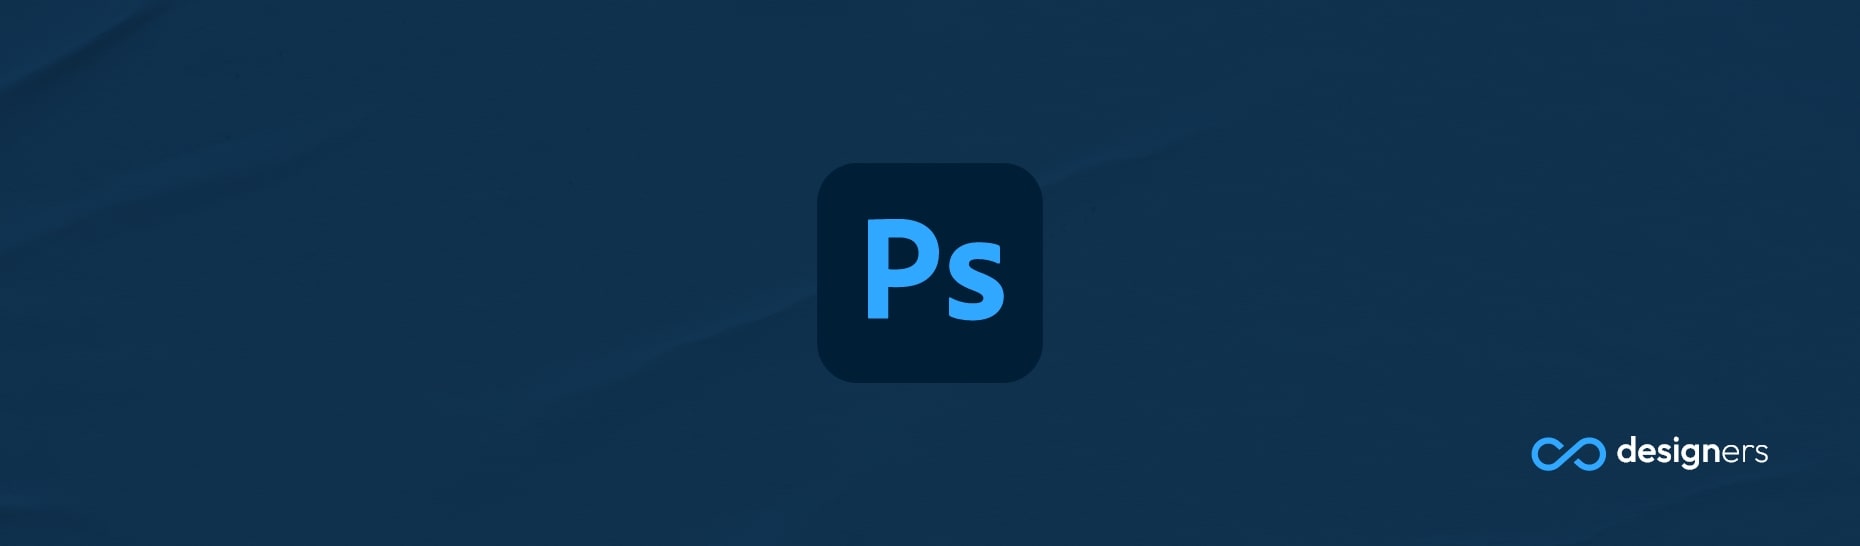 How Do I Straighten an Image in Photoshop CC?